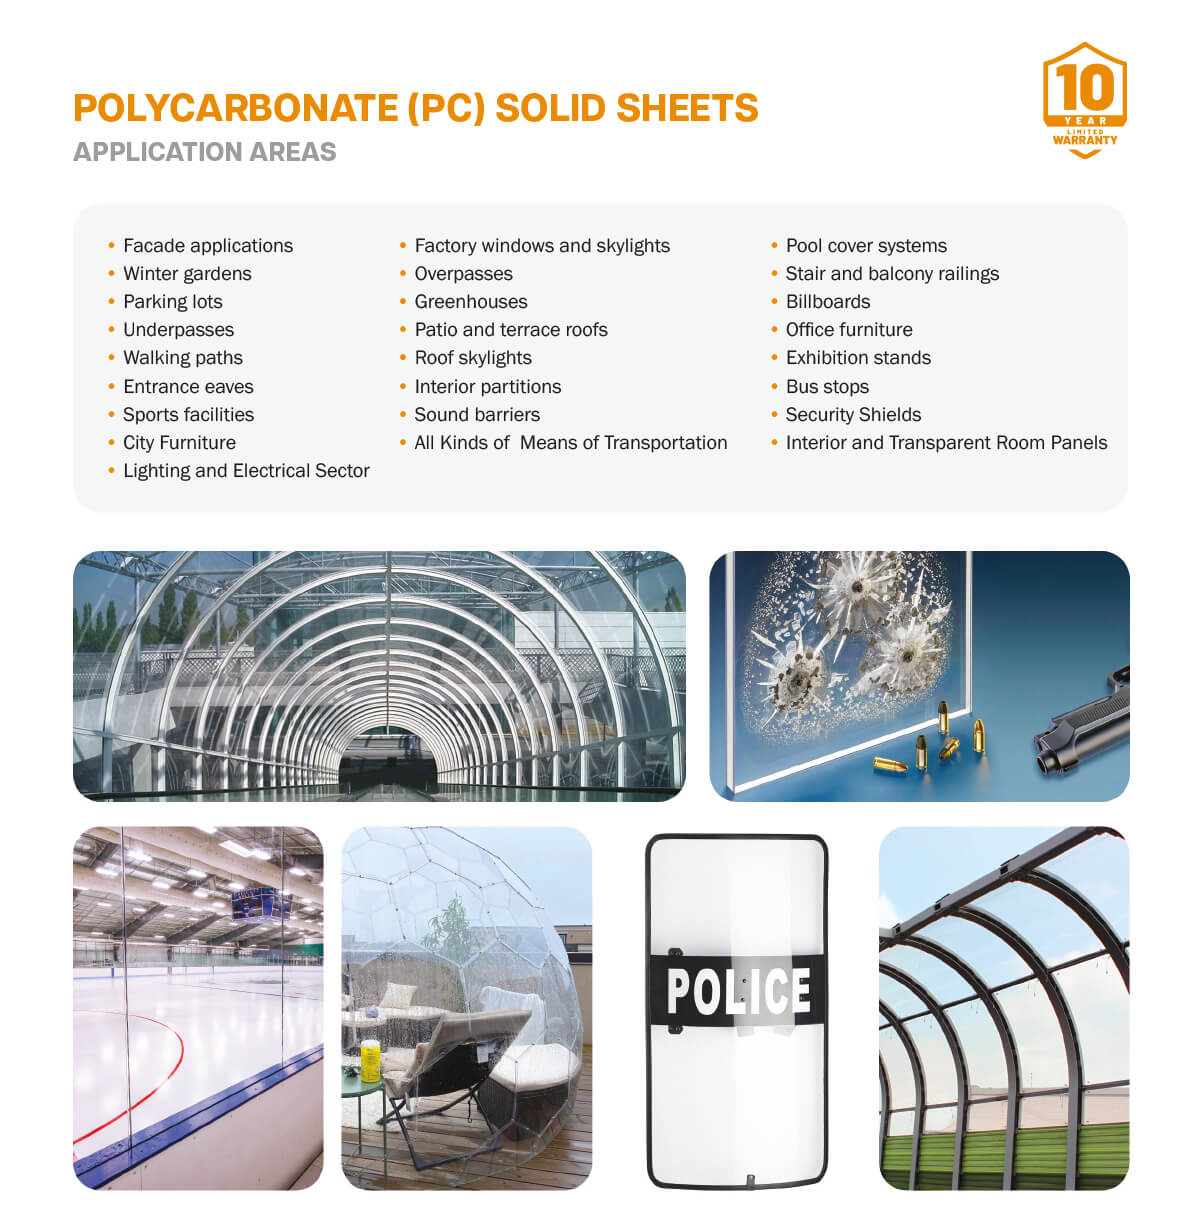 Polycarbonate (PC) Solid Sheets